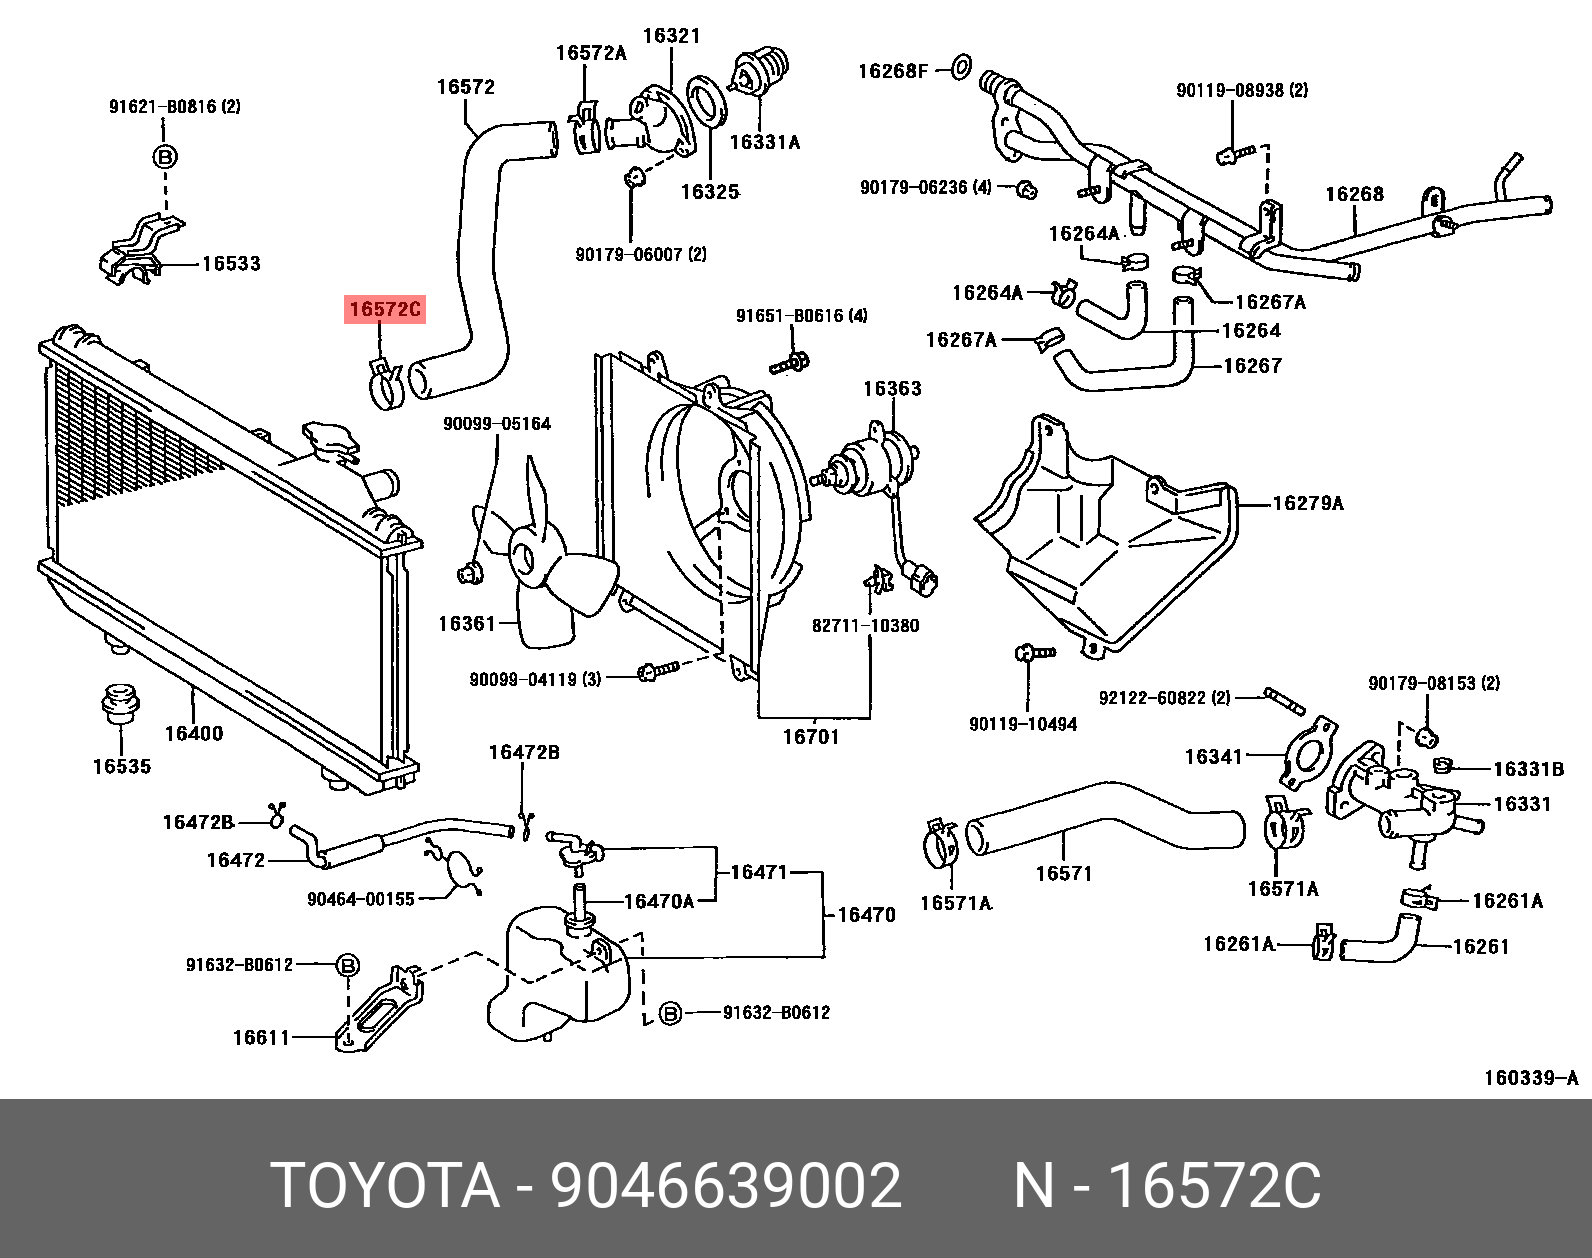 CAMRY 201706-, CLAMP OR CLIP, HOSE(FOR RADIATOR OUTLET NO.1)